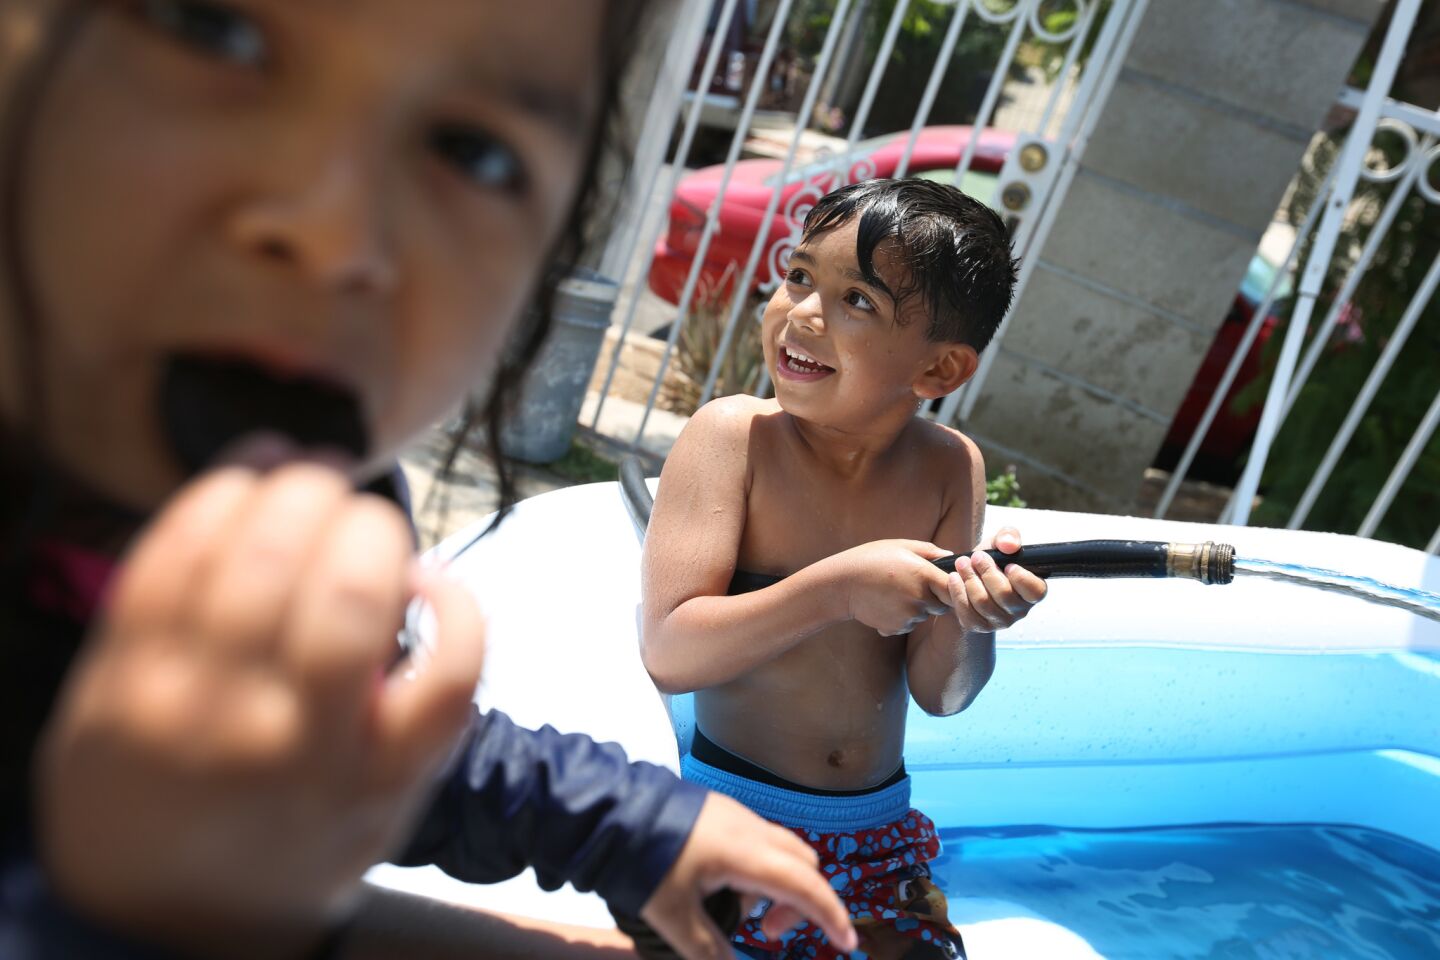 Jocelyn Caravantes, 3, left, and her brother Dean, 6, play in their Boyle Heights pool on a hot afternoon while their mother, Evelyn, watches from a chair in the shade.